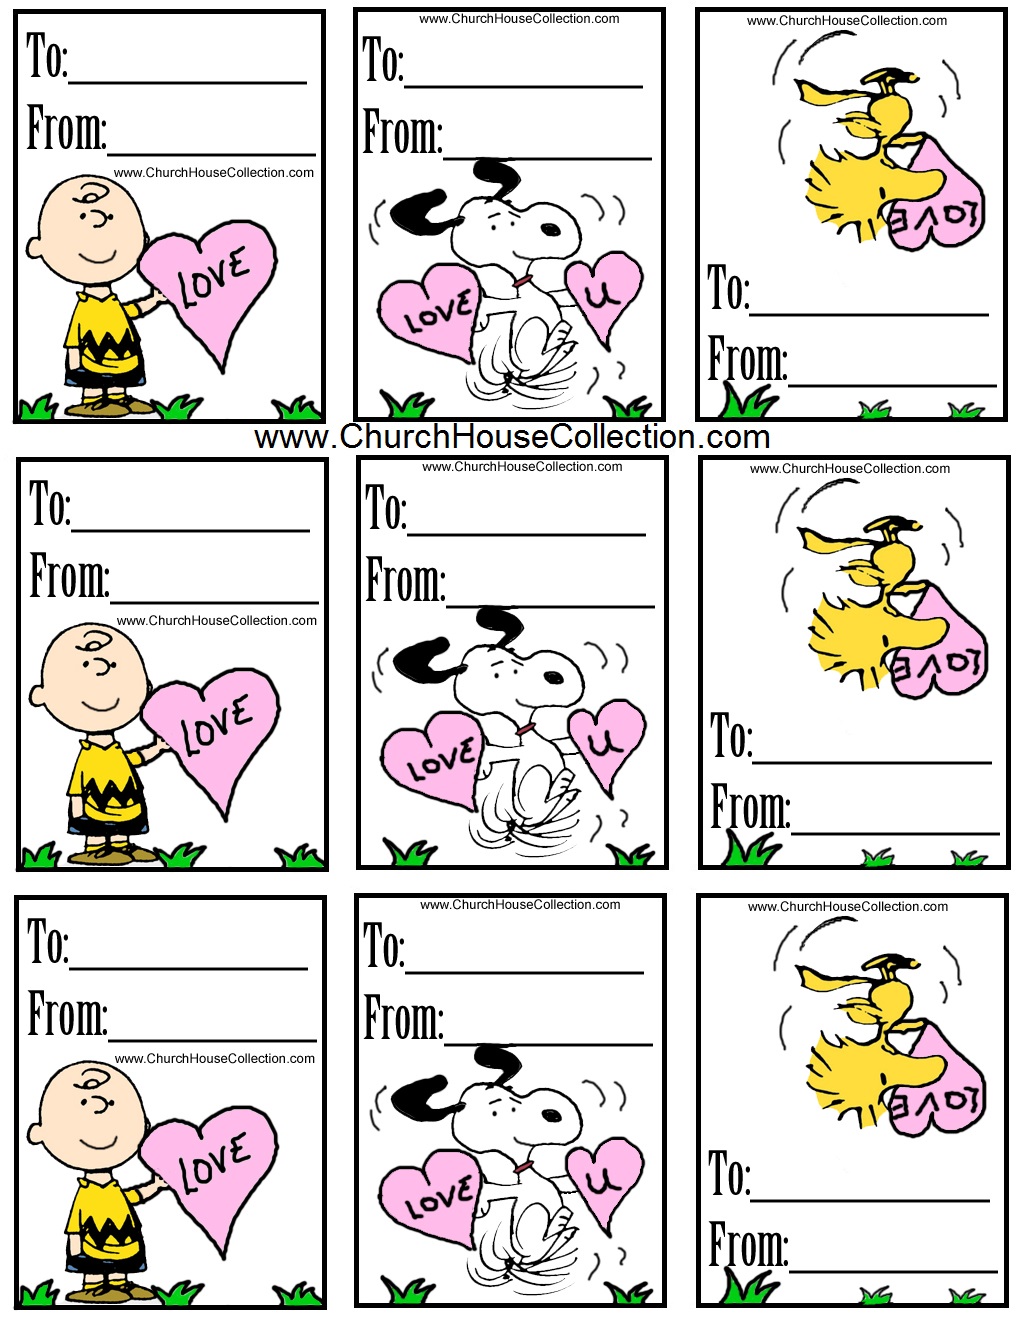 church-house-collection-blog-snoopy-charlie-brown-and-woodstock-printable-valentine-s-day